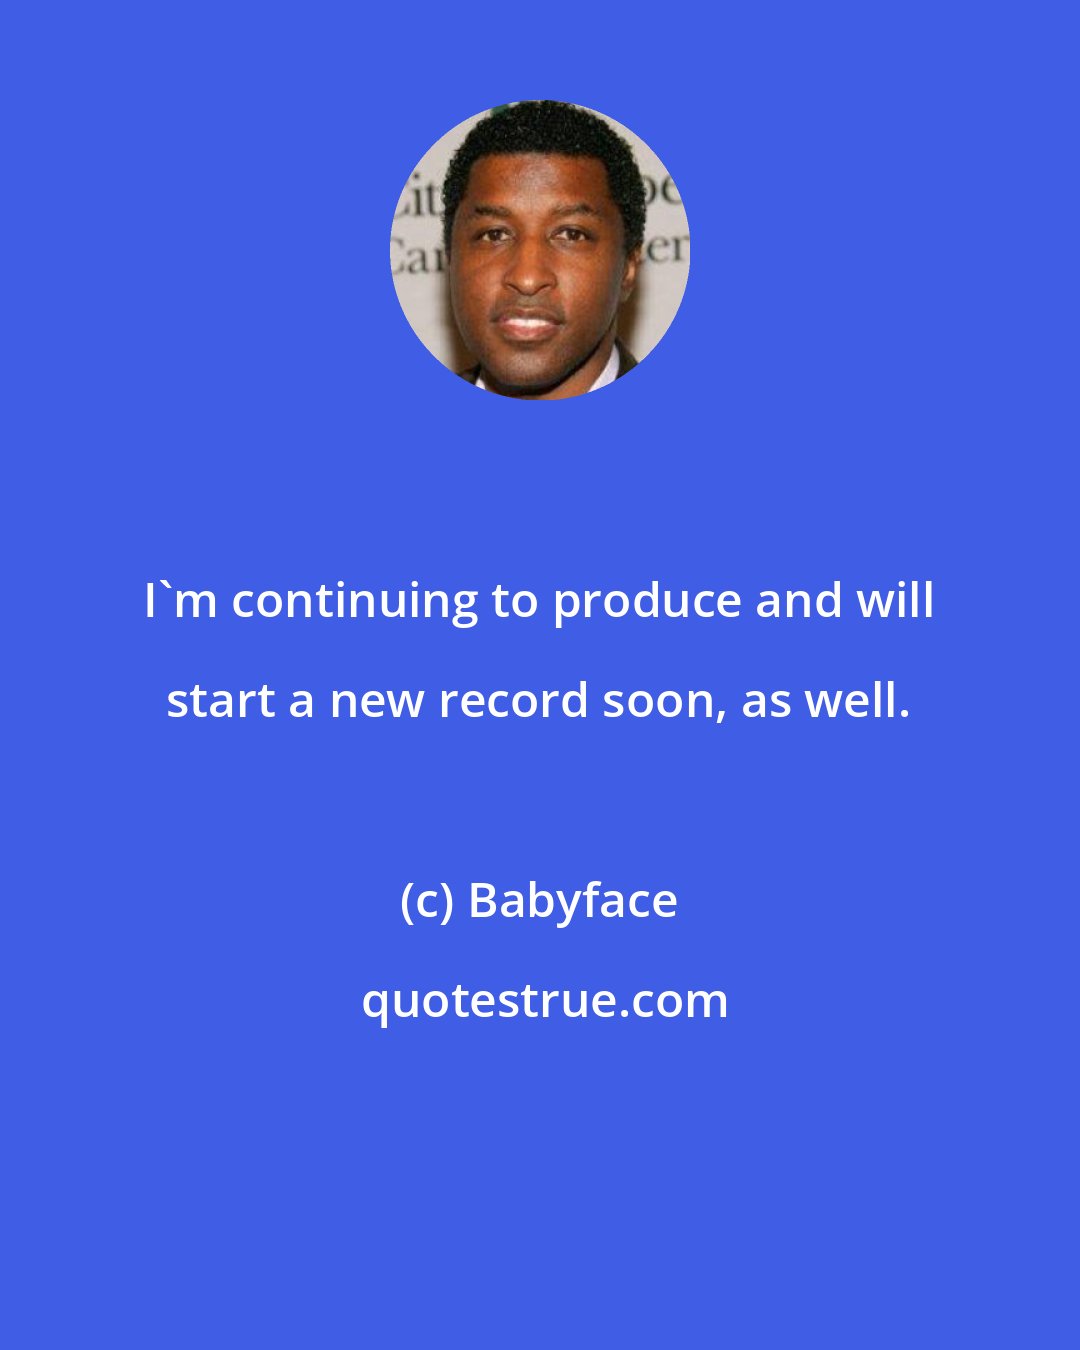 Babyface: I'm continuing to produce and will start a new record soon, as well.